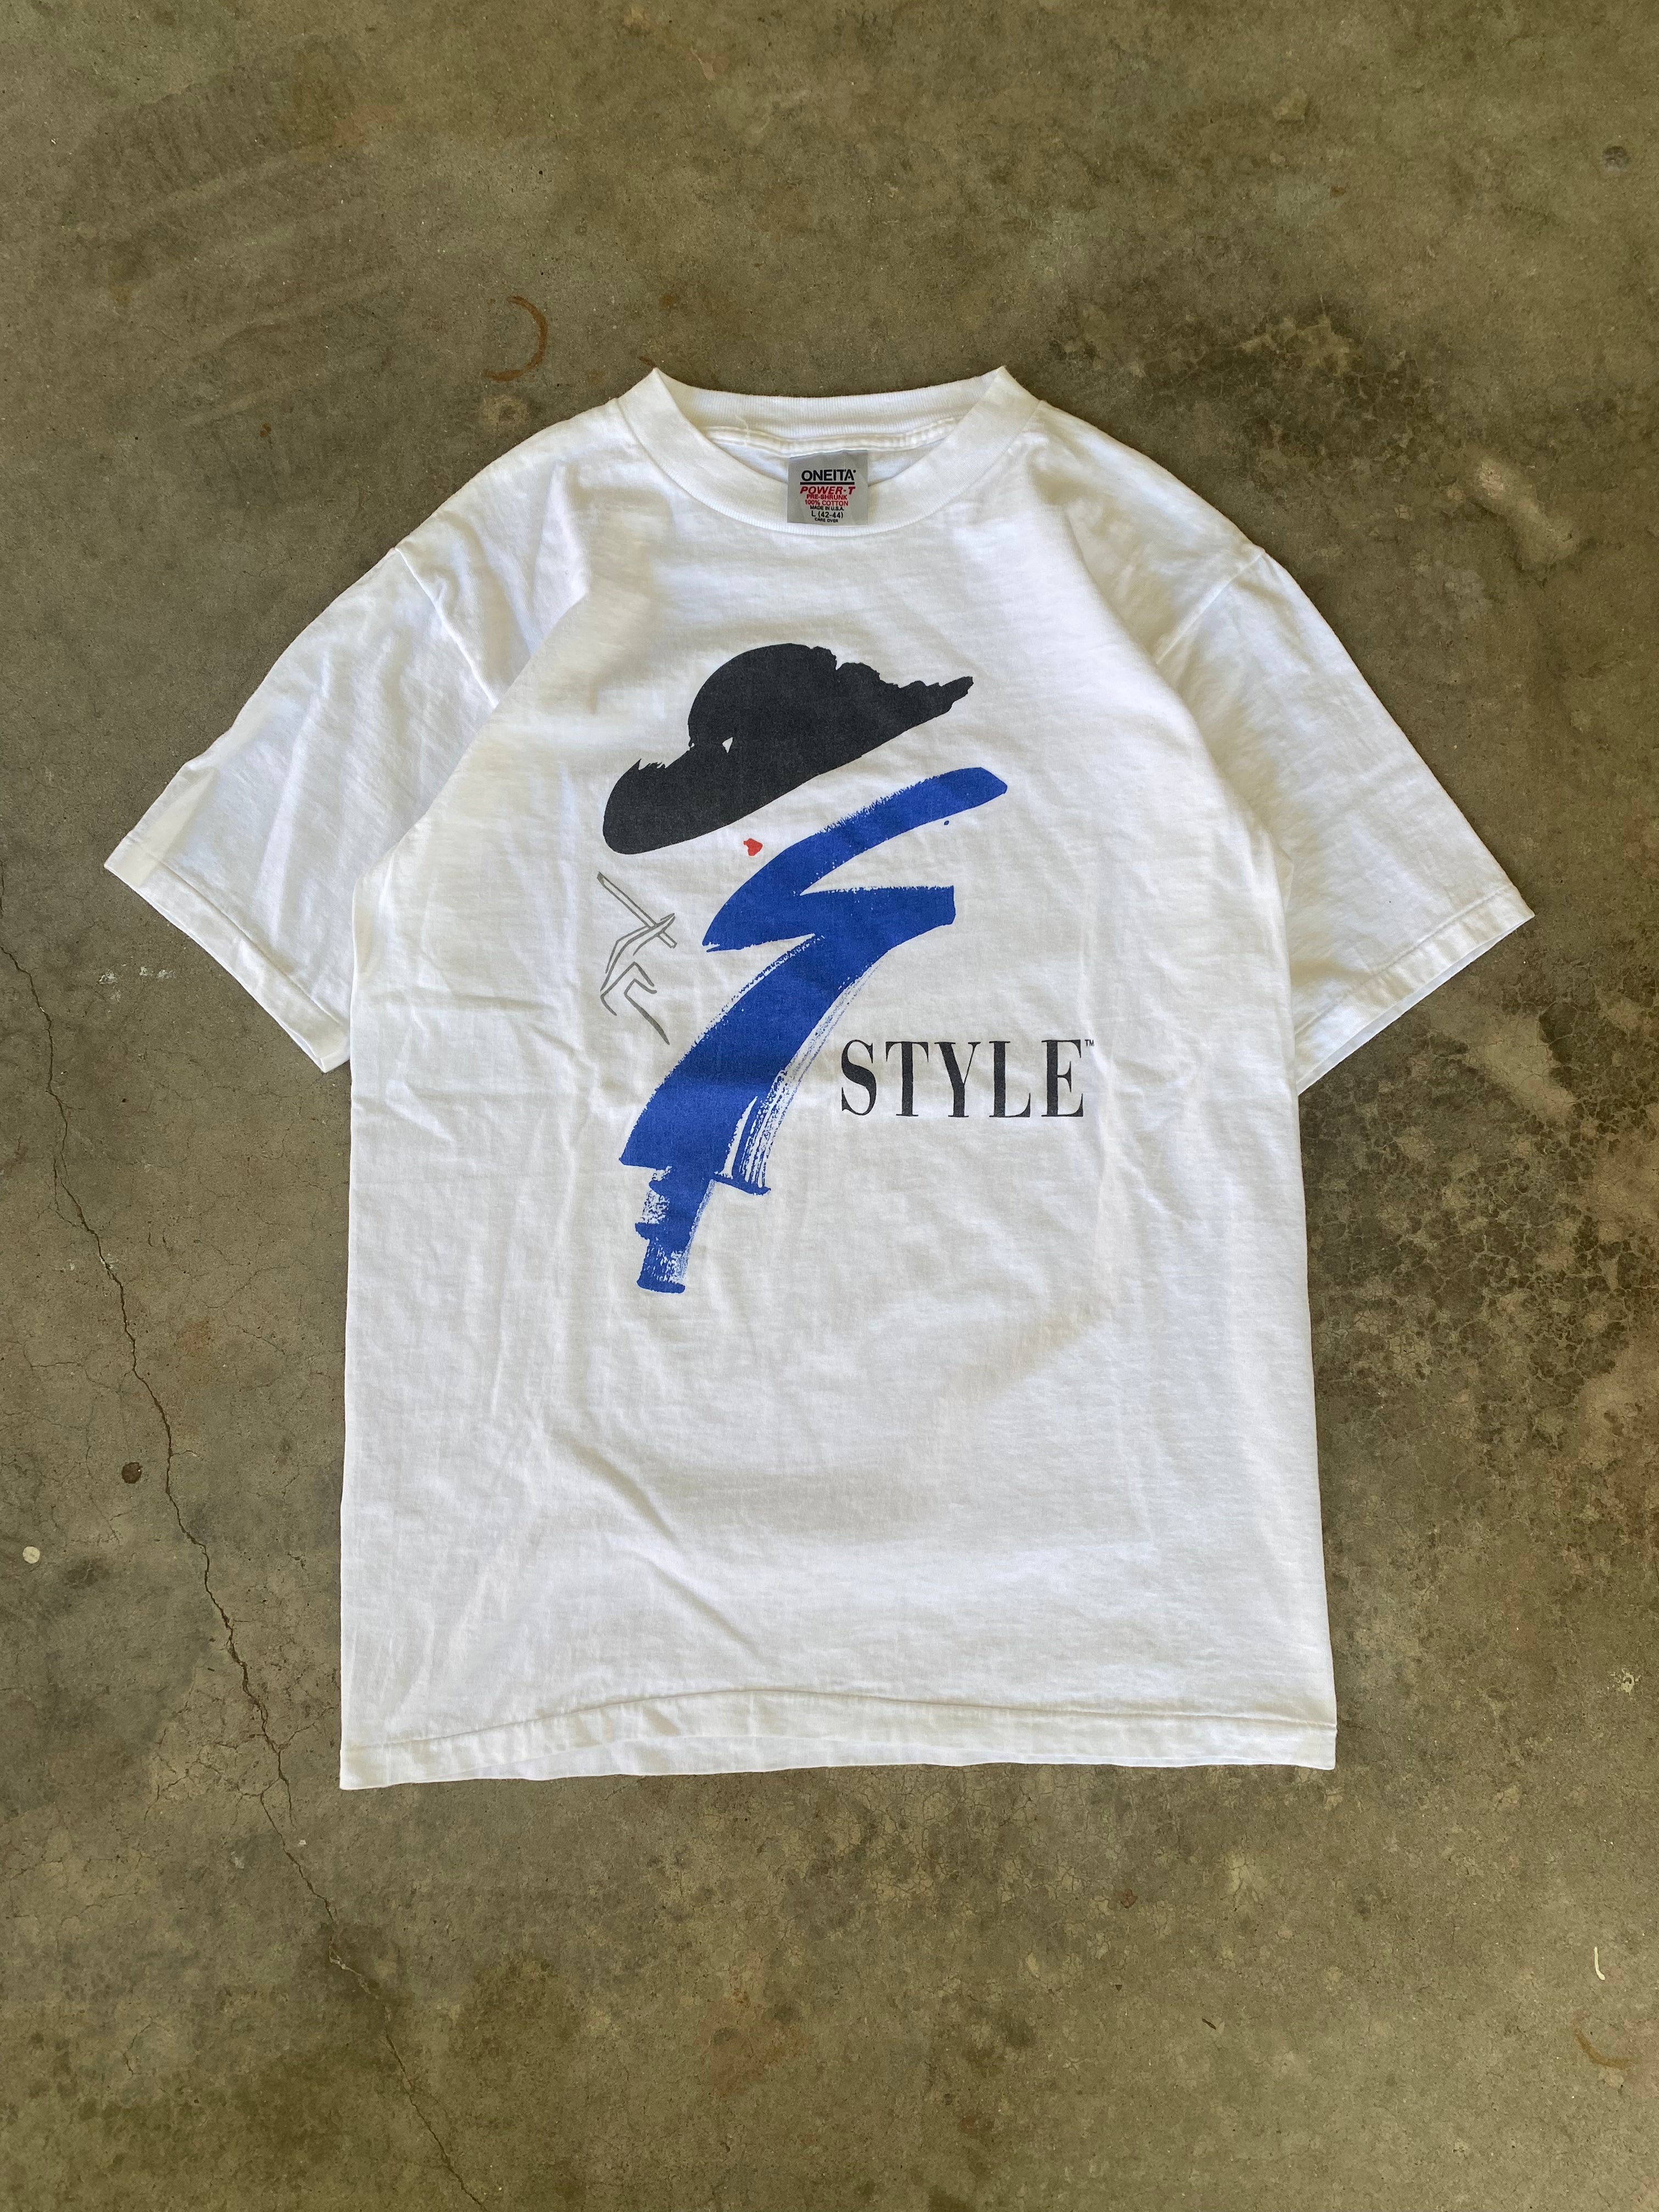 1990s Style T-Shirt (S/M)